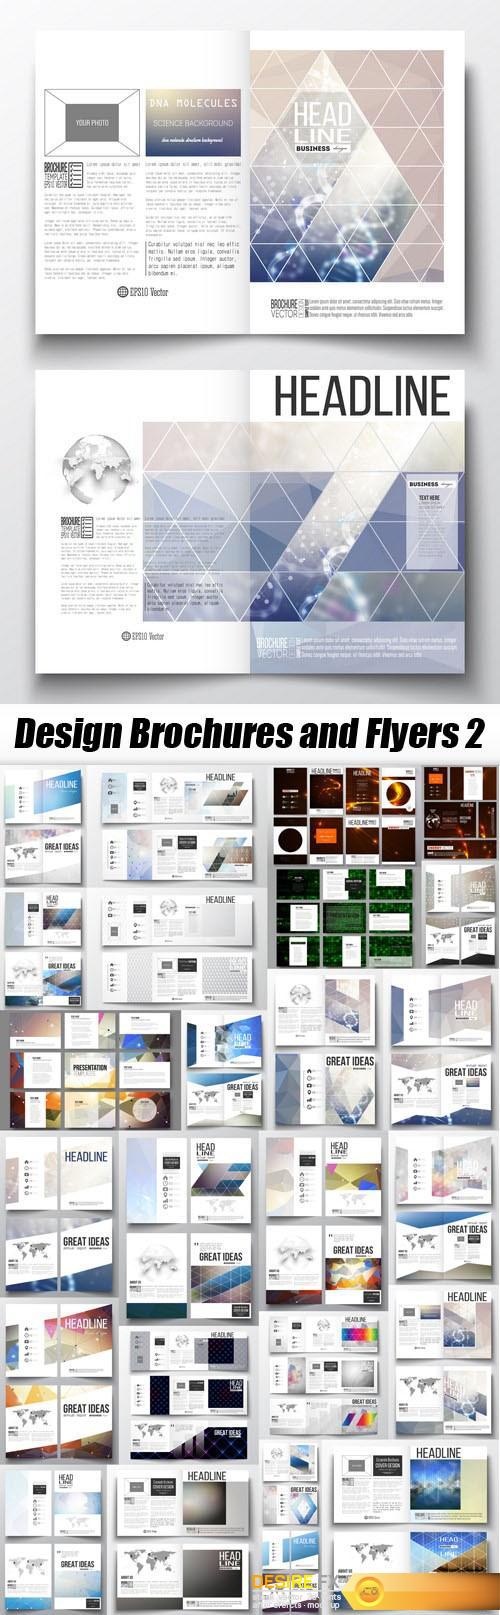 Design Brochures and Flyers 2 